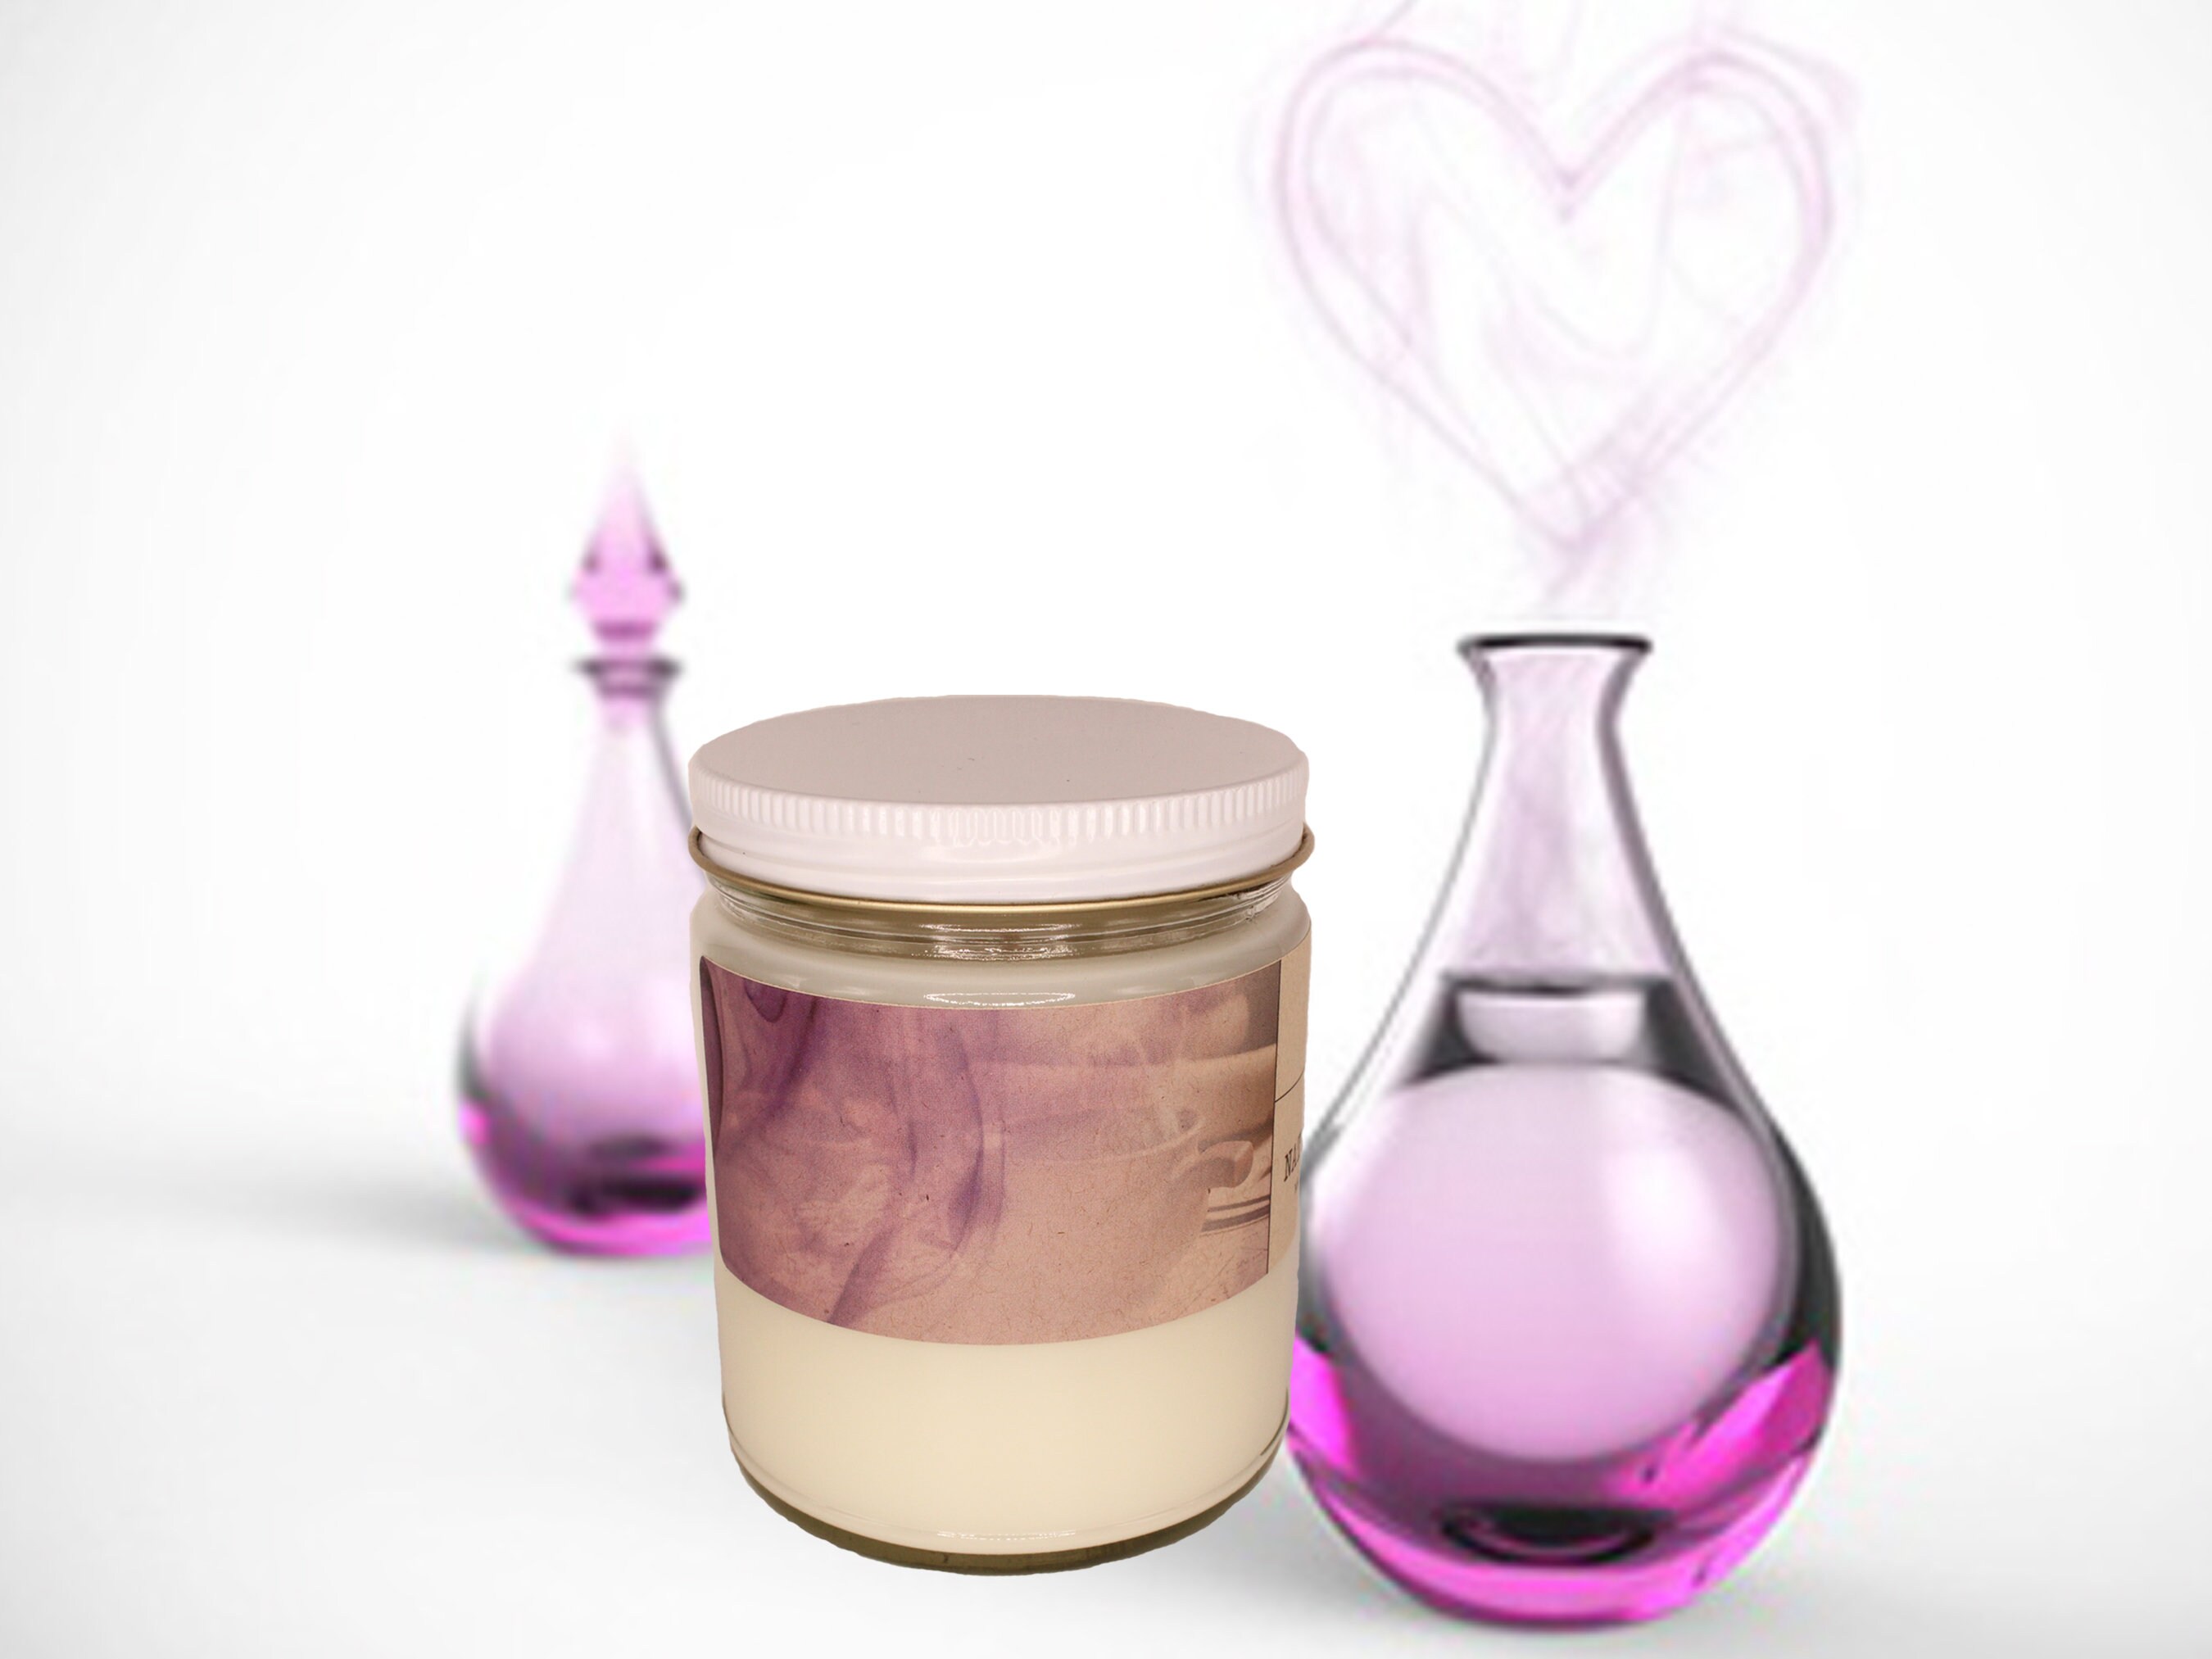 Love Spell Type Fragrance Oil for Birthday Soap Making Supplies, Body,  Candle Making & Diffuser 